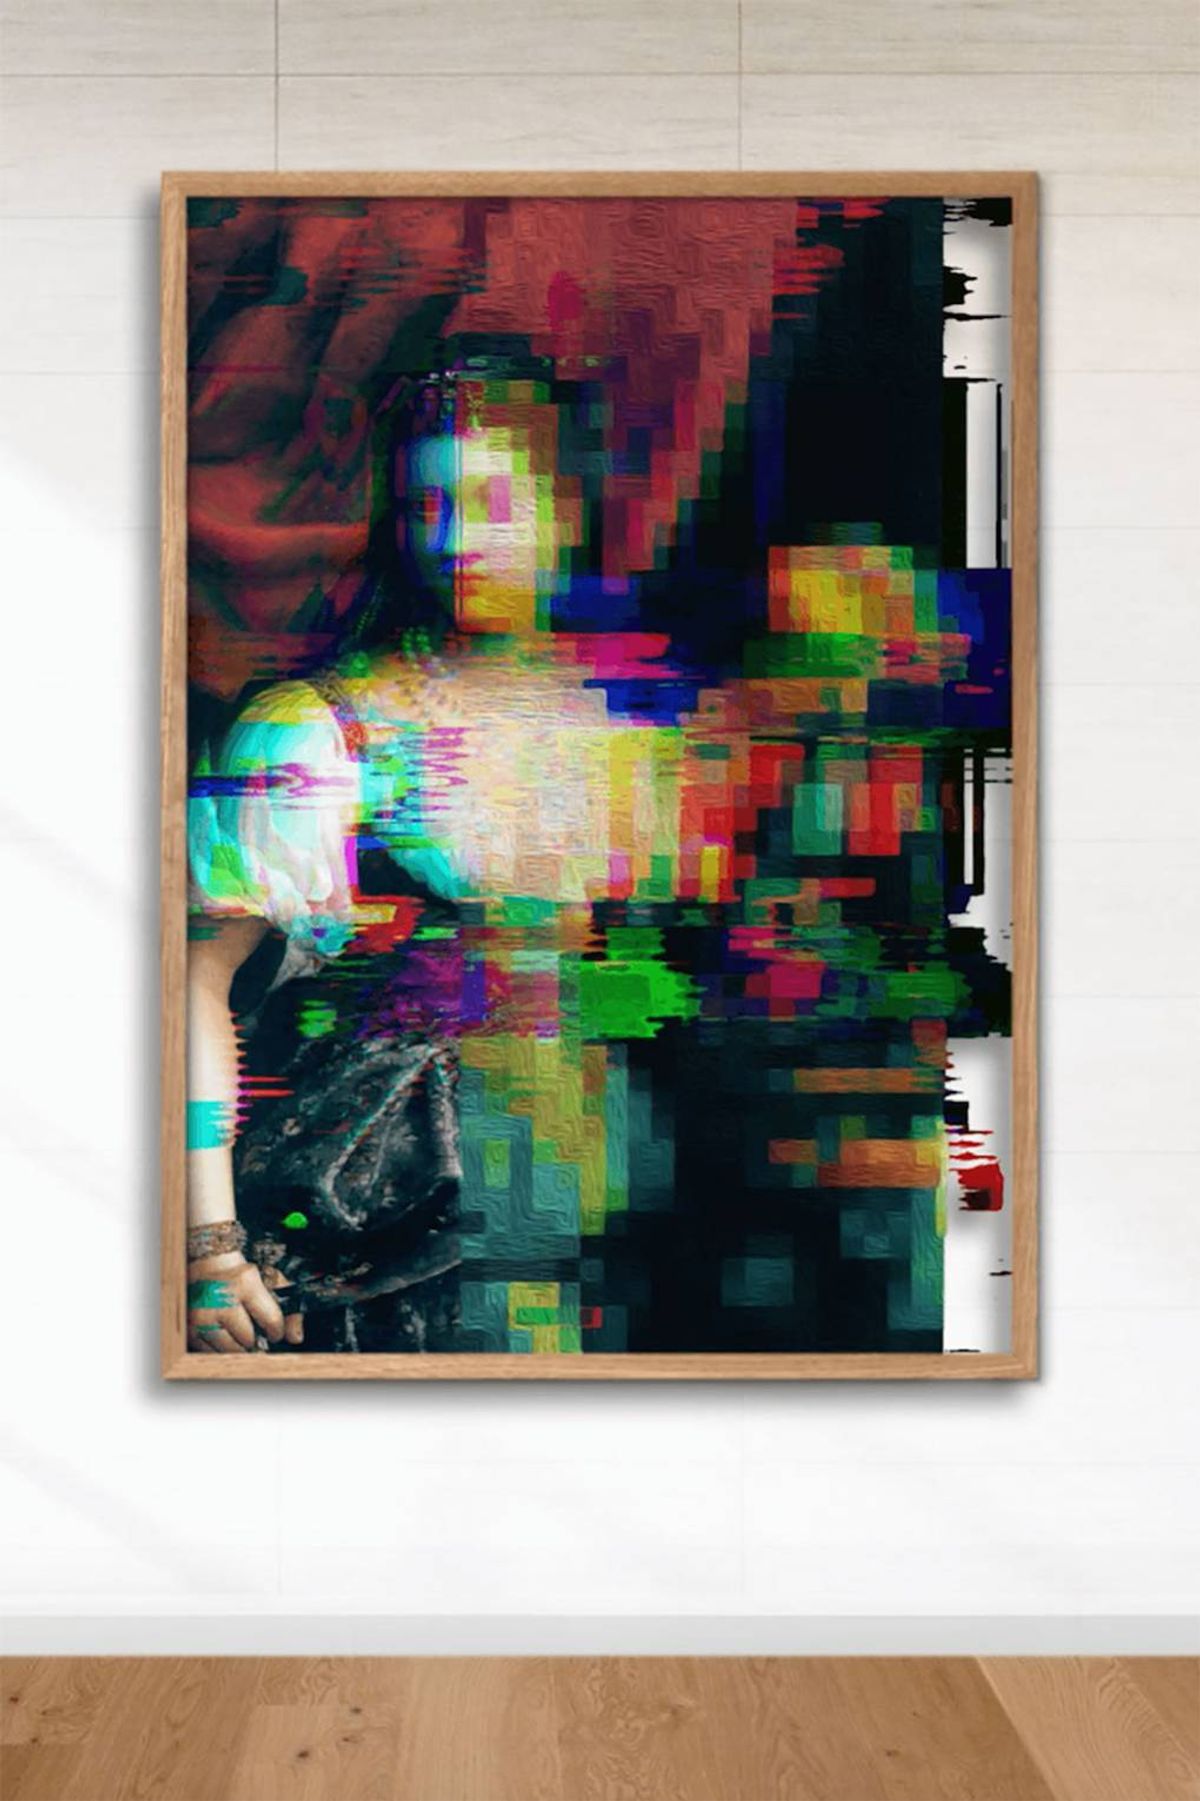 A still from Rewind Collective's video NFT Remember Us IV (Watch Your Head), which shows digital reinterpretations of four works by famous women artists Lavinia Fontana, Fede Galizia, Artemisia Gentileschi and Elisabetta Sirani depicting  the story of Judith beheading Holofernes Christie’s Images 2021